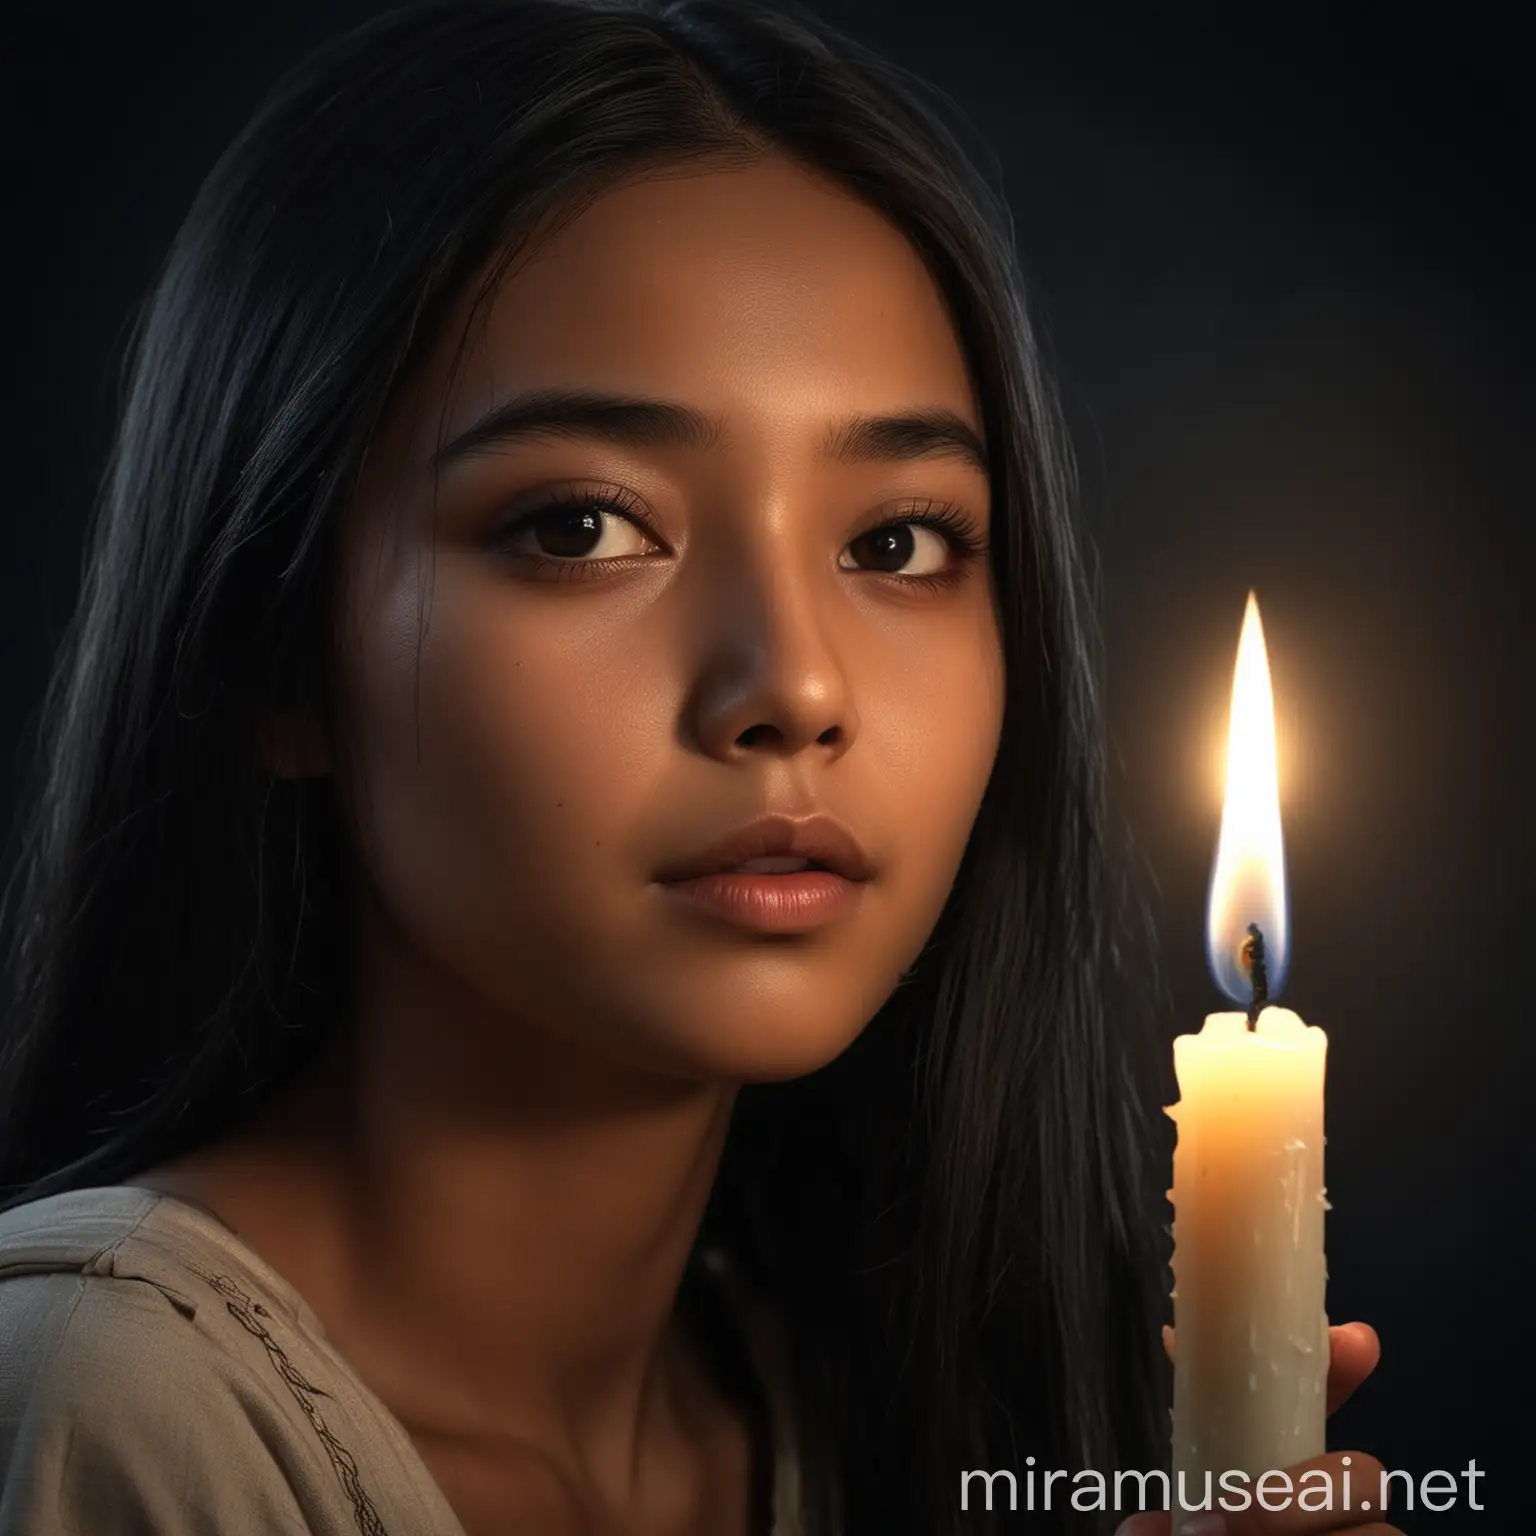 a Indonesian girl with long black hair holding a lit candle under her chin. The candle light illuminates part of her face. To the side of the girl is writing 'Vel Nays' clearly and correctly readable. A dark, ultra realistic HDR extreme background